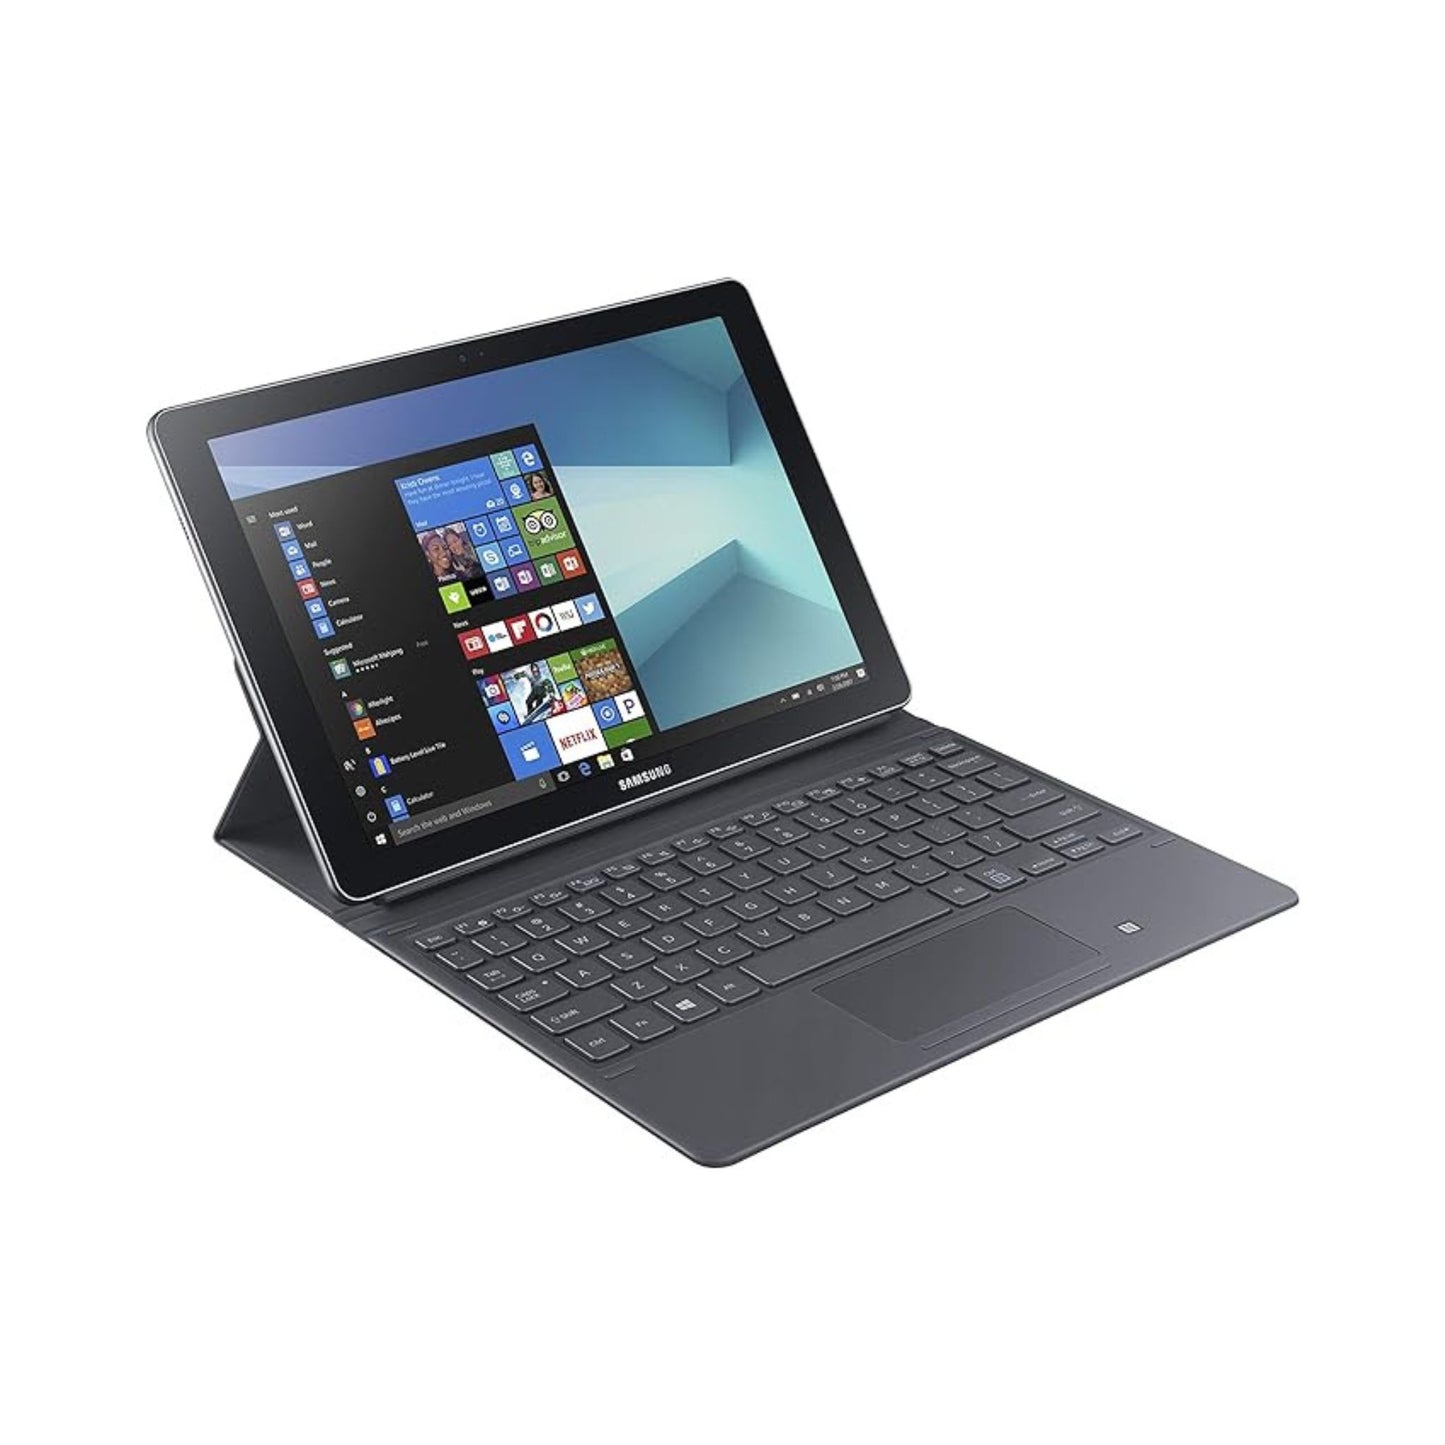 Samsung Galaxy Book 10.6 Tablet - Intel Core m3, 10.6 Inch, 128GB, 4GB RAM, 4G LTE, Windows 10 Home, Silver with English Keyboard Black and S Pen